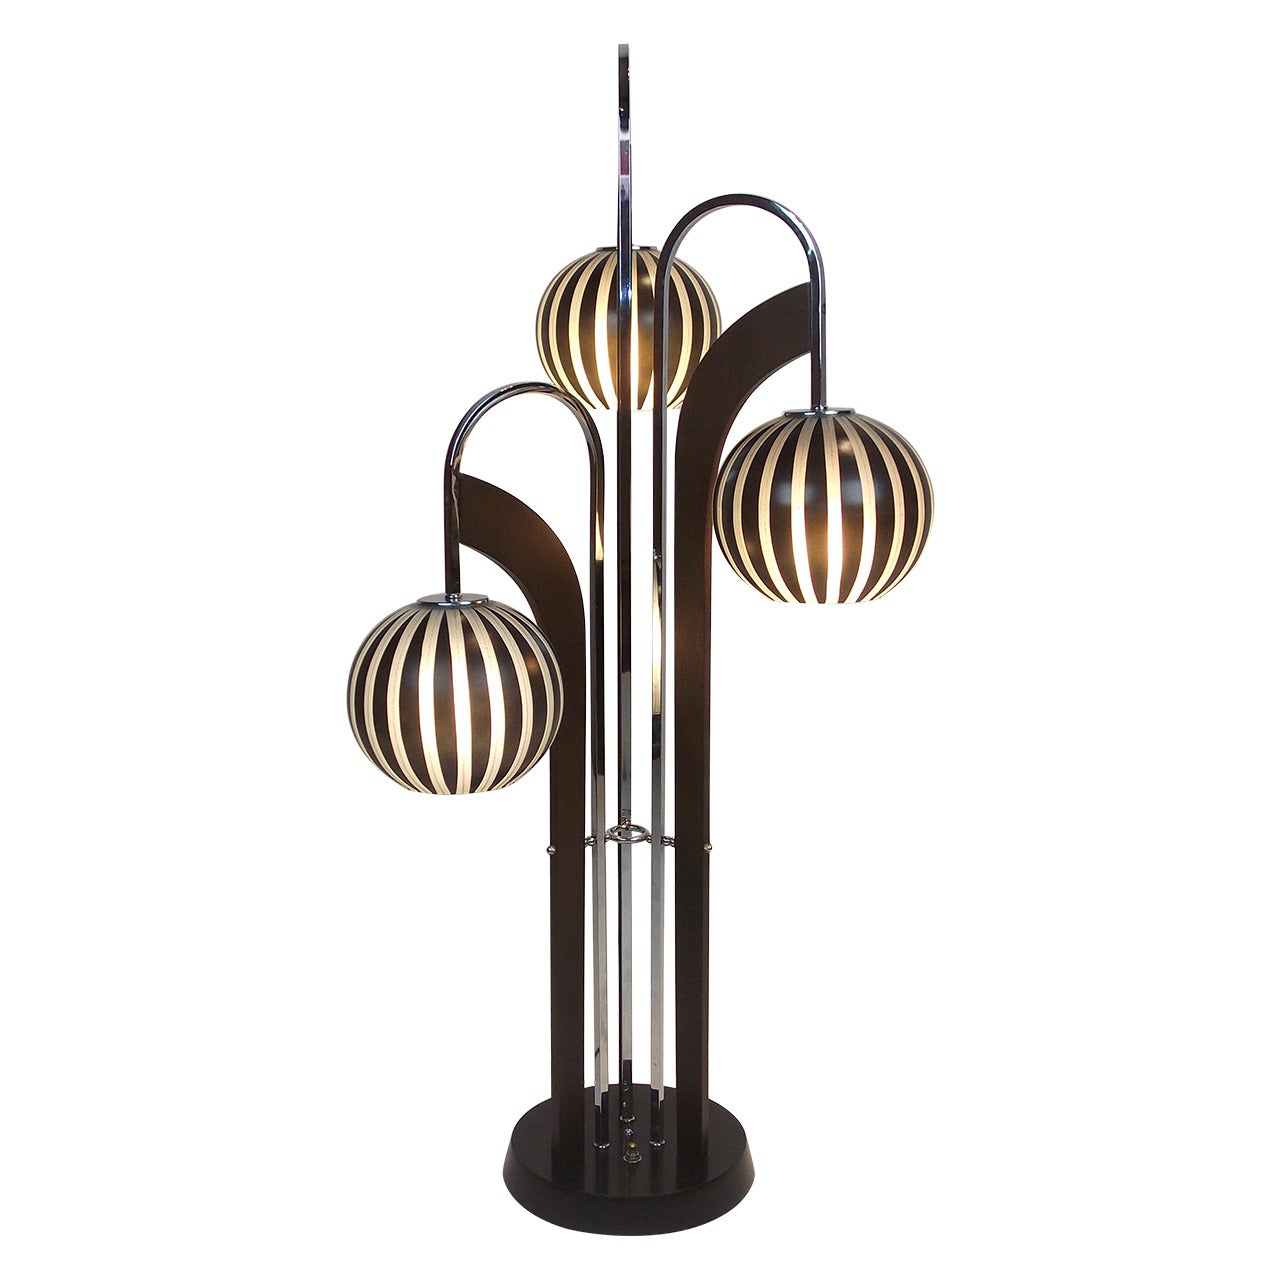 Exceptional Mid-Century Modern Three-Globe Lamp For Sale